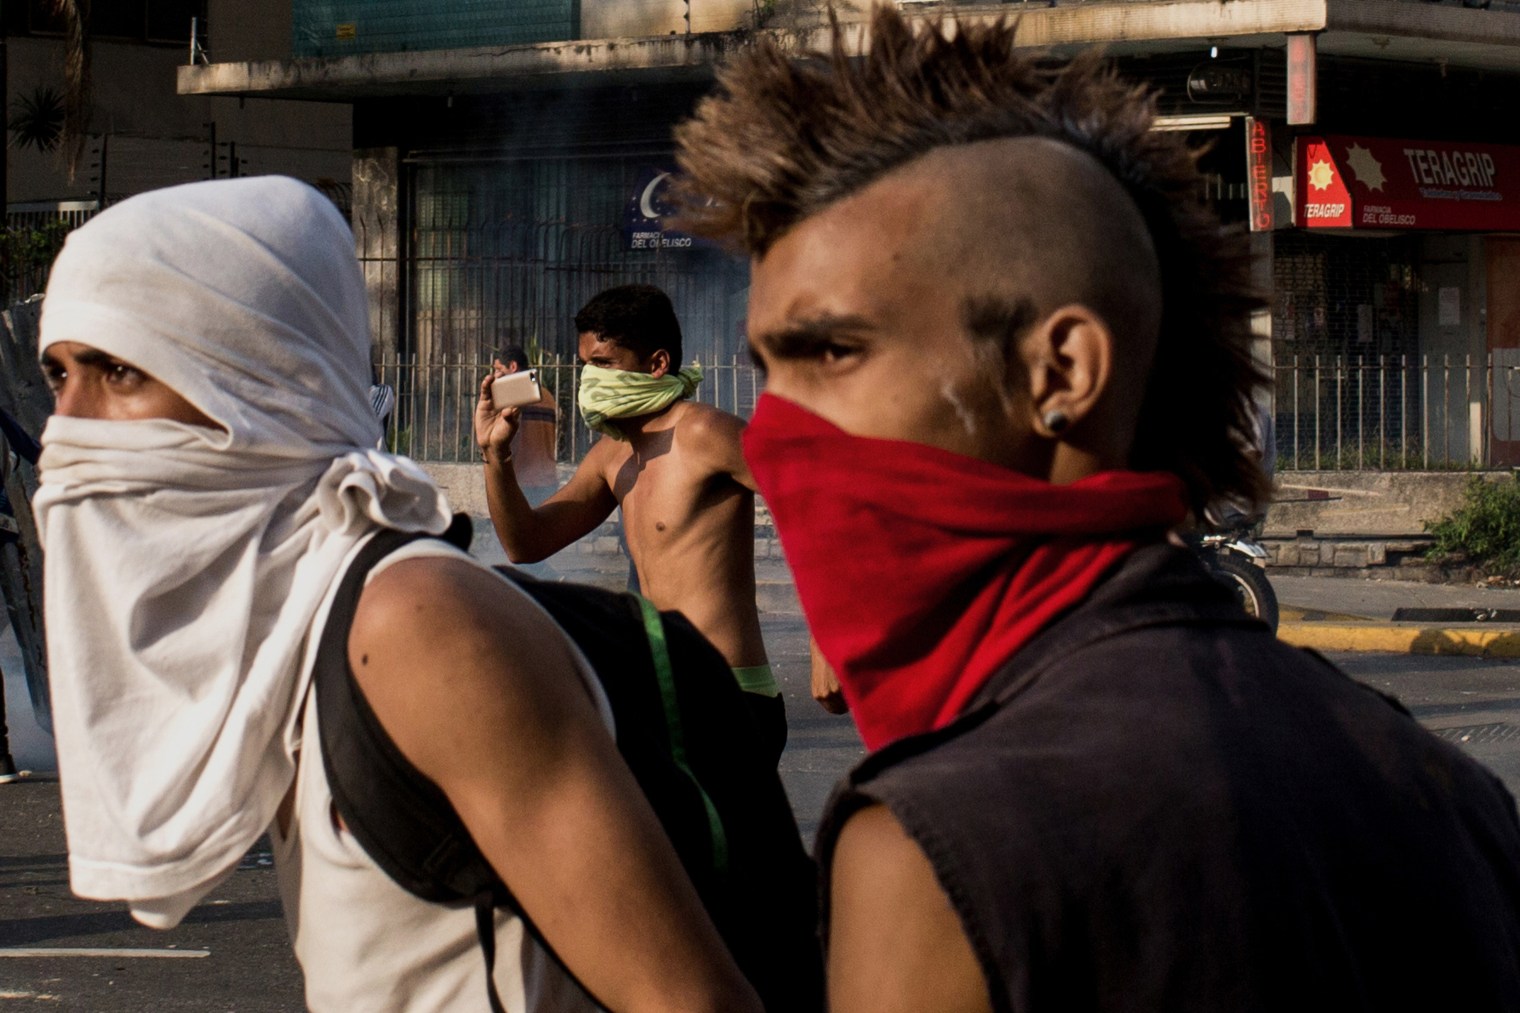 Protesters face off against Venezuela's National Guard in eastern Caracas on April 26, 2017.